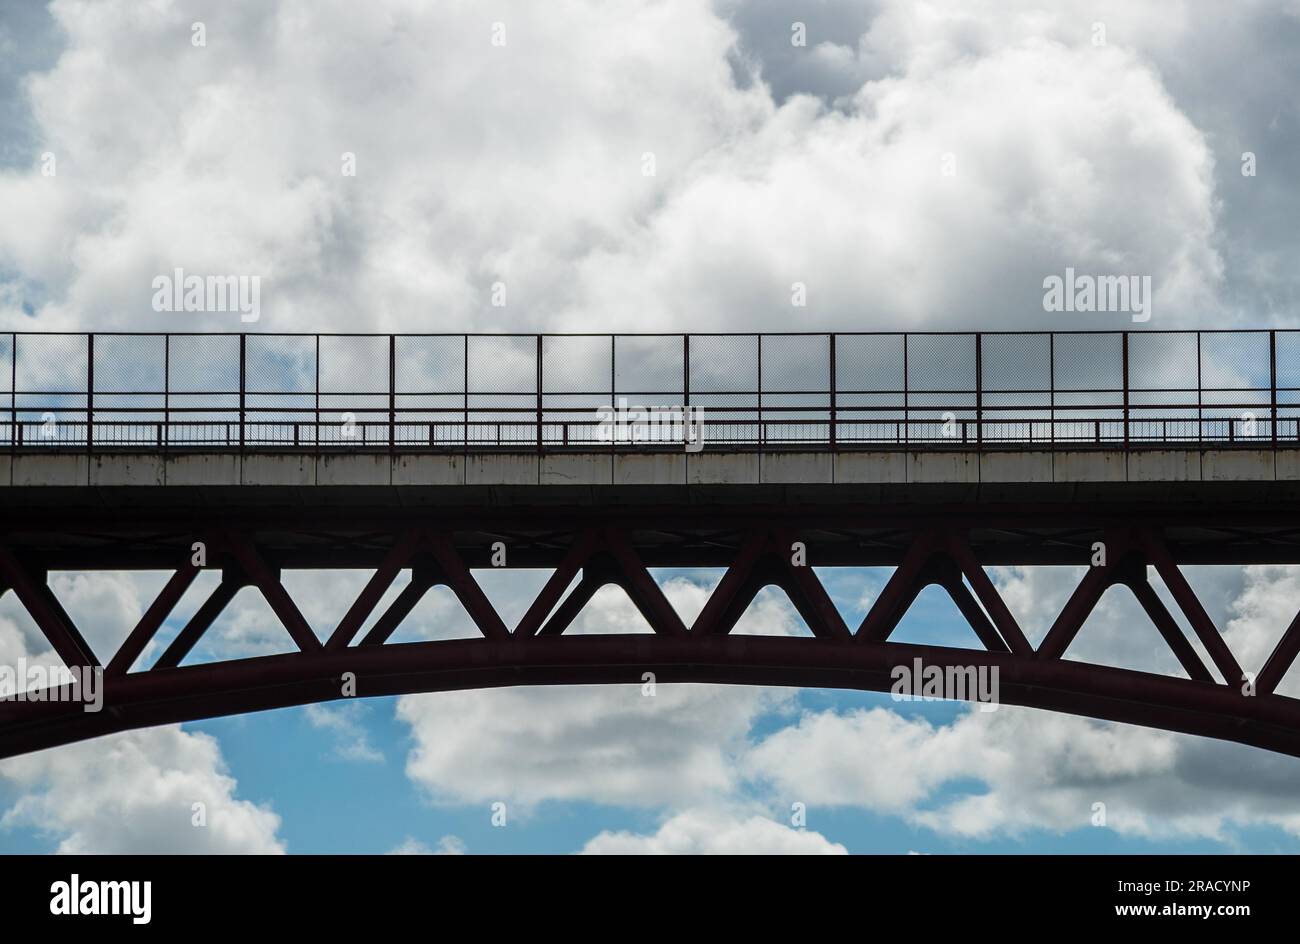 Image composed of a bridge in the foreground in backlight and castellated clouds contrasting with the blue sky in the background. Stock Photo